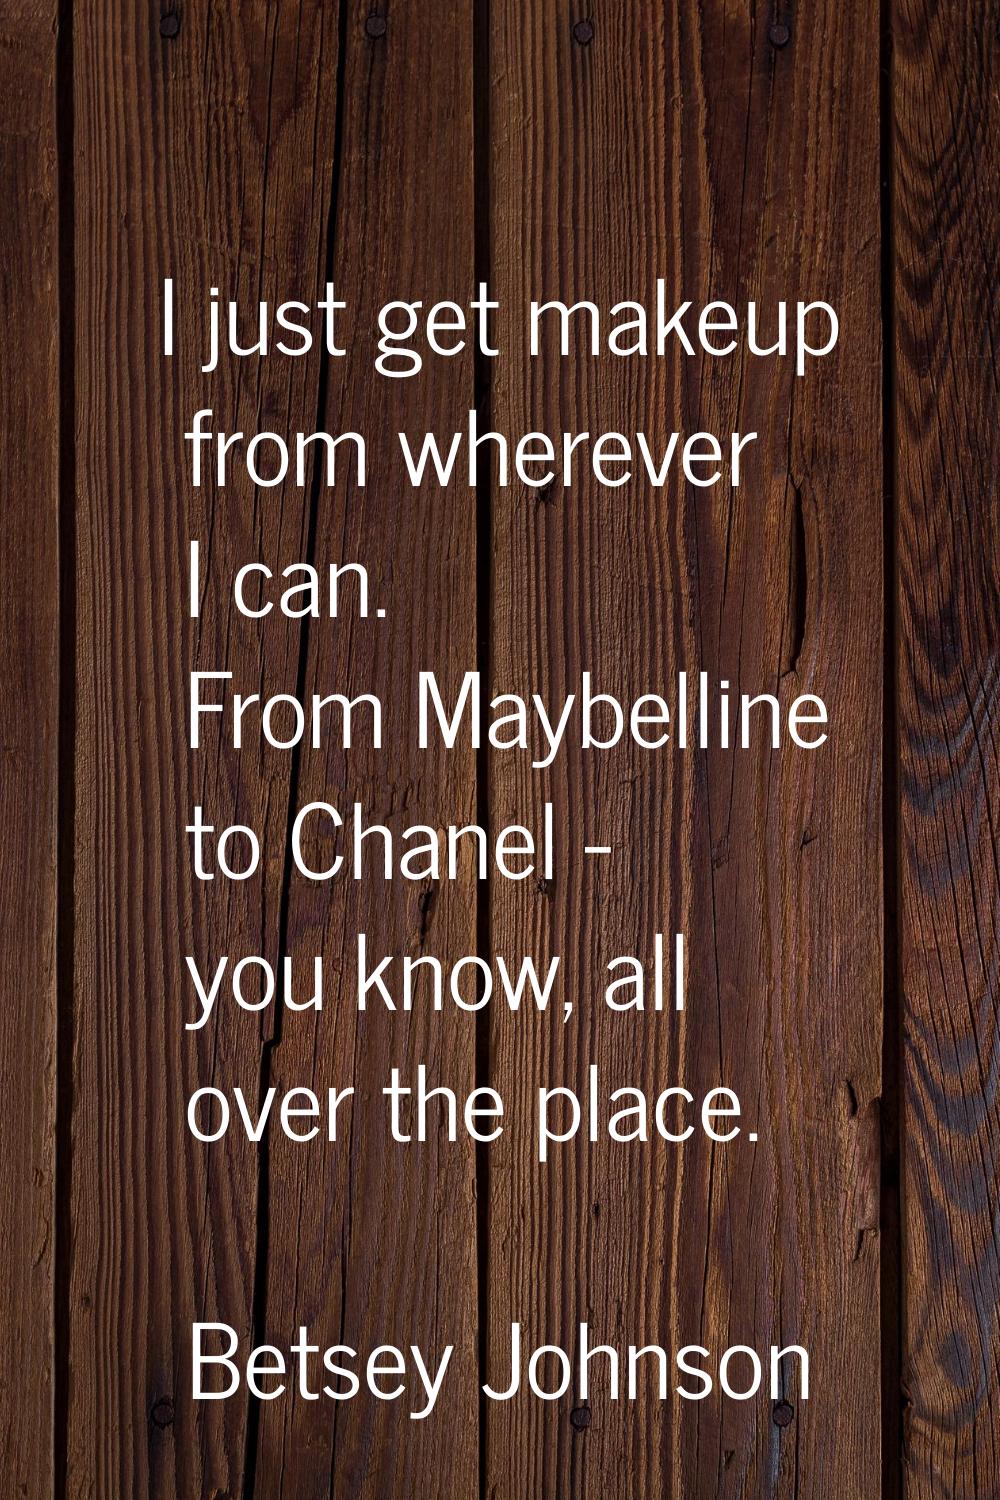 I just get makeup from wherever I can. From Maybelline to Chanel - you know, all over the place.